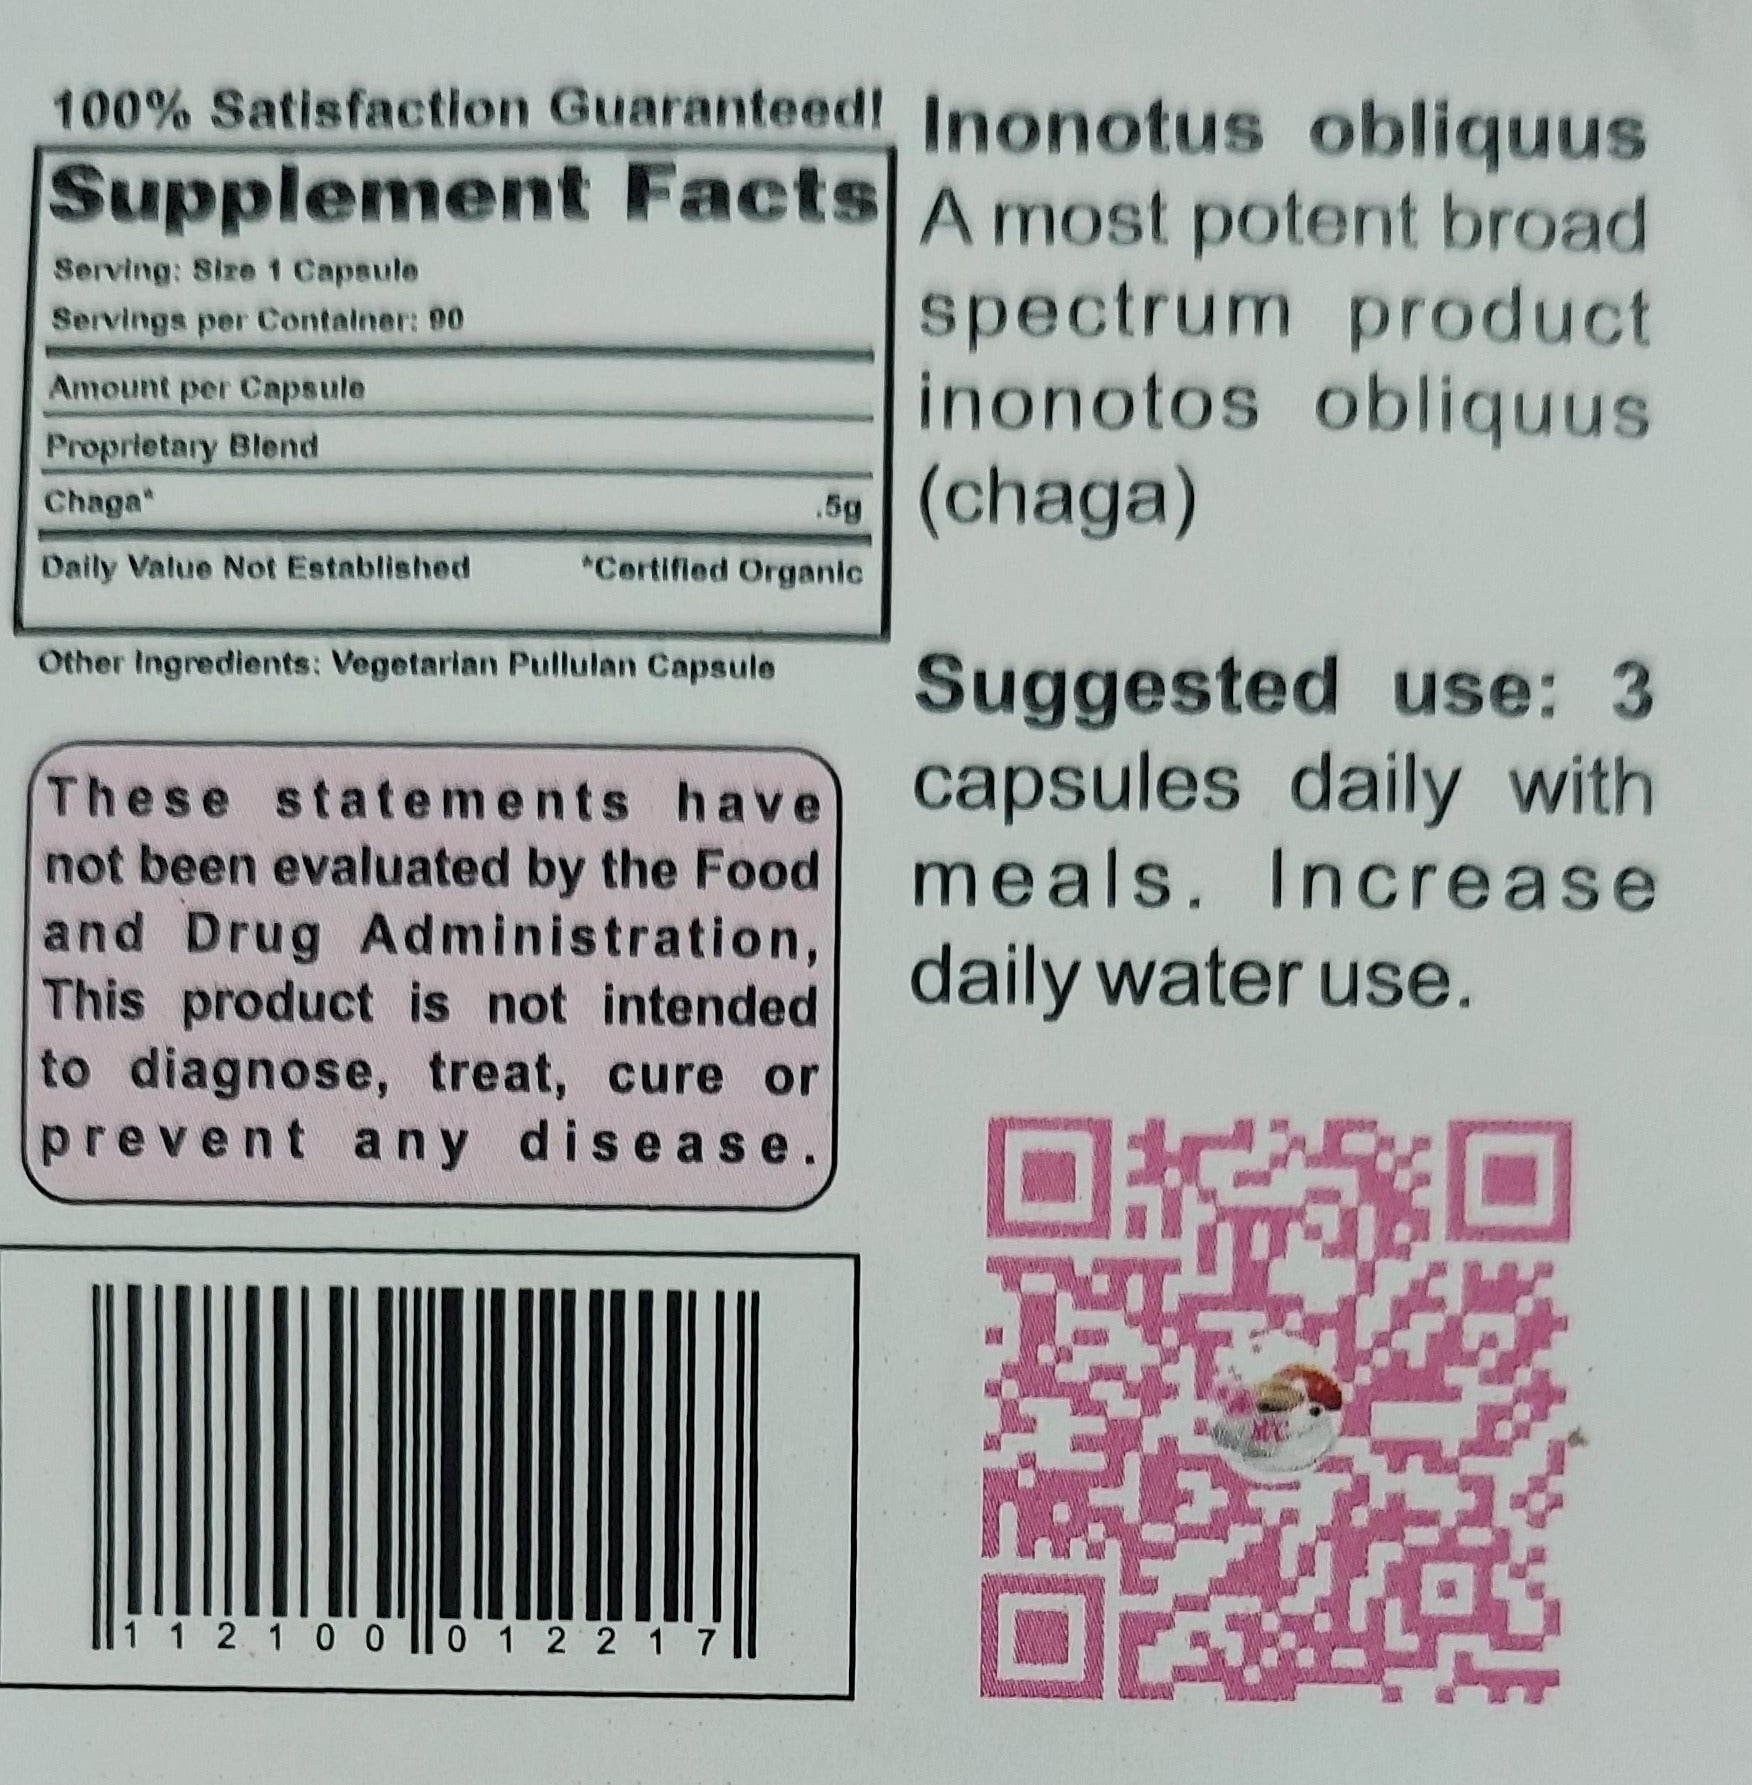 Photo of the back label of Ma' Cline's Chaga2~Max a dietary supplement. Chaga Mushroom Blend 90 capsules 500 mg each. Inonotus Obliquus, www.maclinescoffee.com, Carson City, NV 89701, 949-371-6085,  Suggested use 3 capsules daily with water